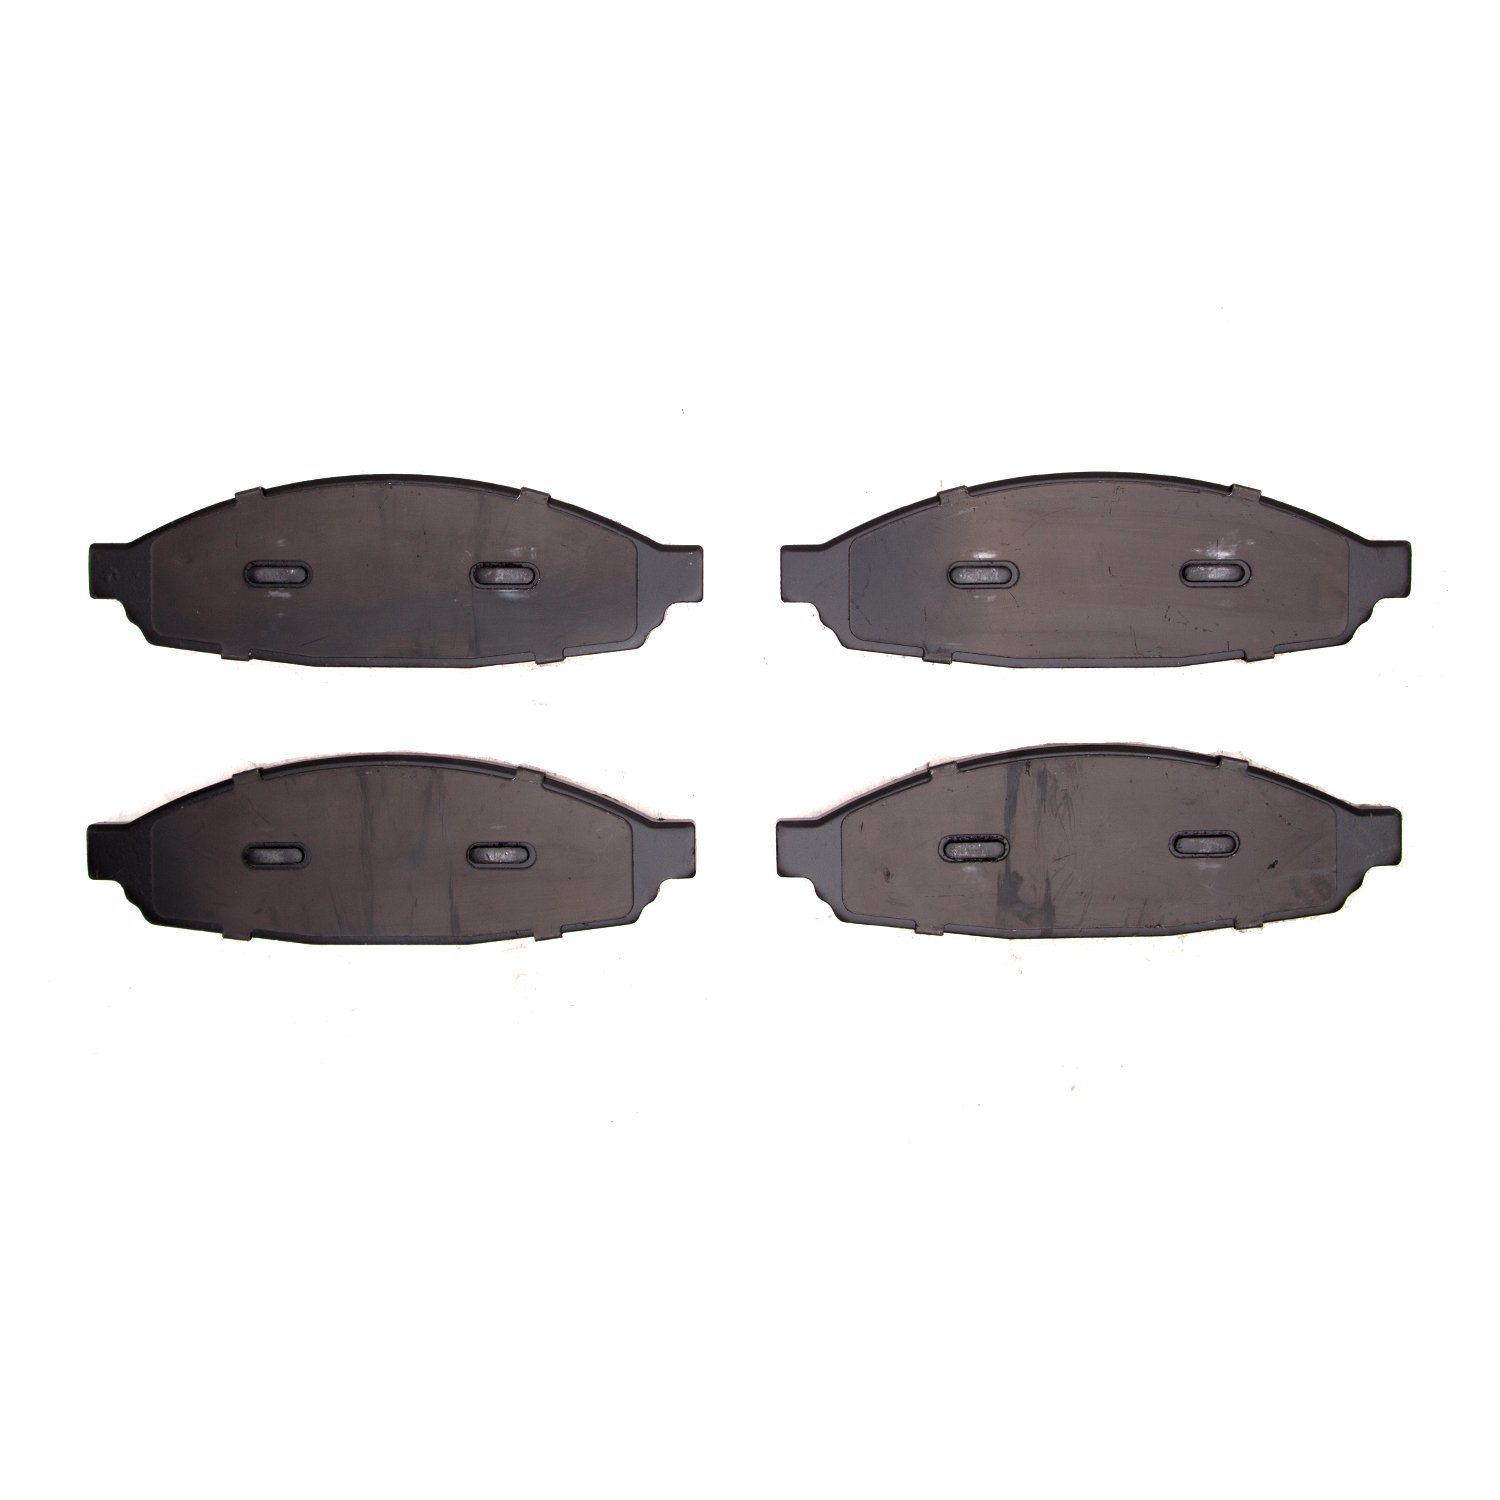 Super-Duty Brake Pads, 2003-2005 Ford/Lincoln/Mercury/Mazda, Position: Front